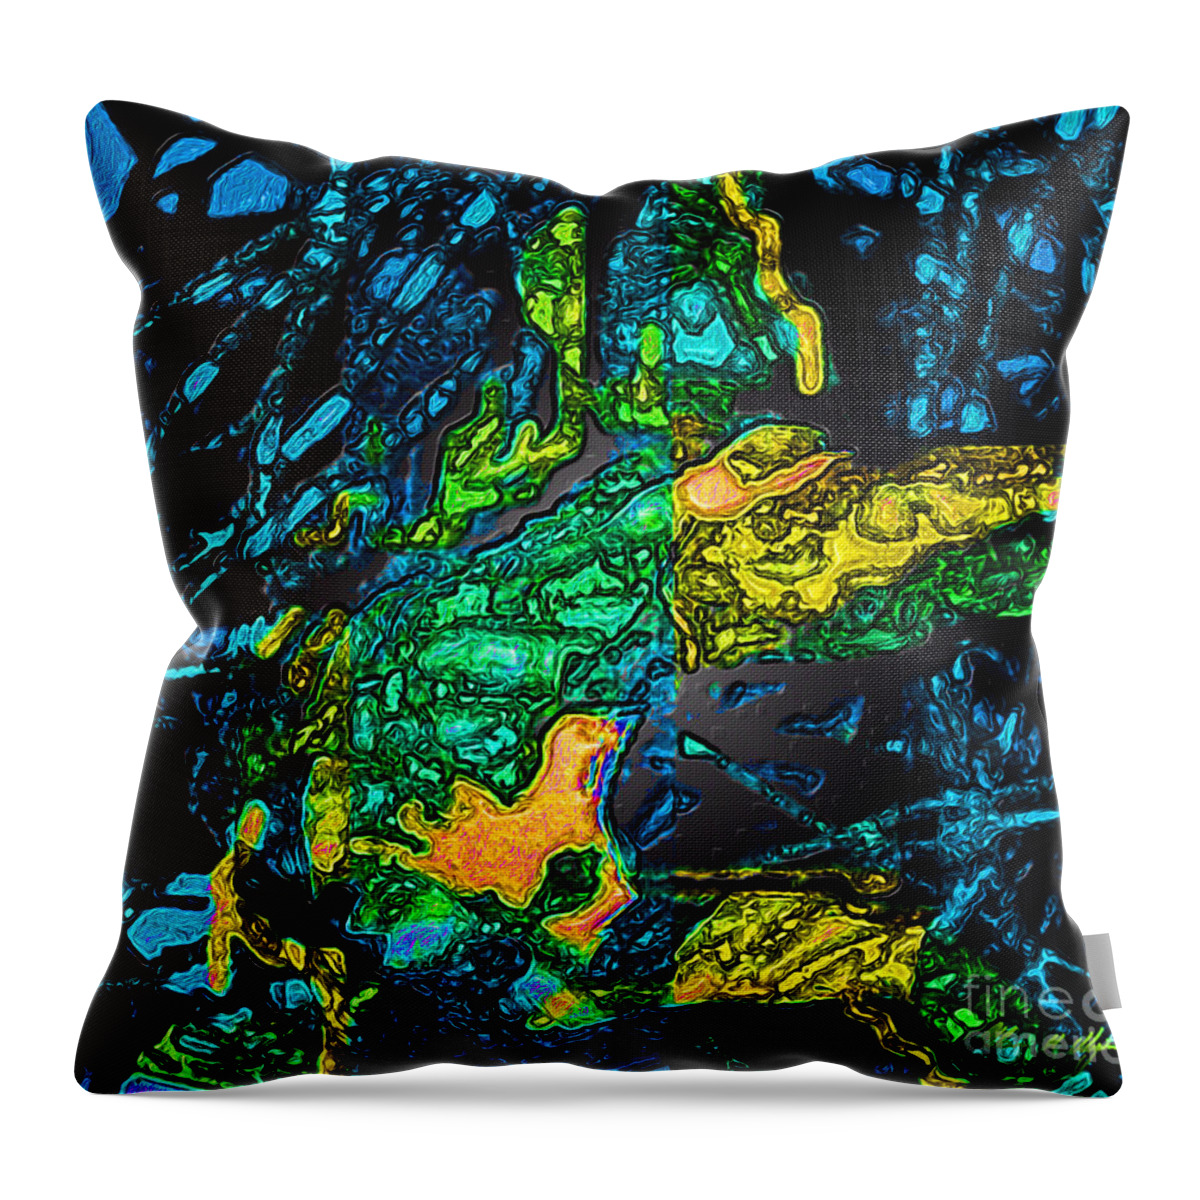 Tangled Transformation Throw Pillow featuring the digital art Tangled Transformation 4 by Aldane Wynter